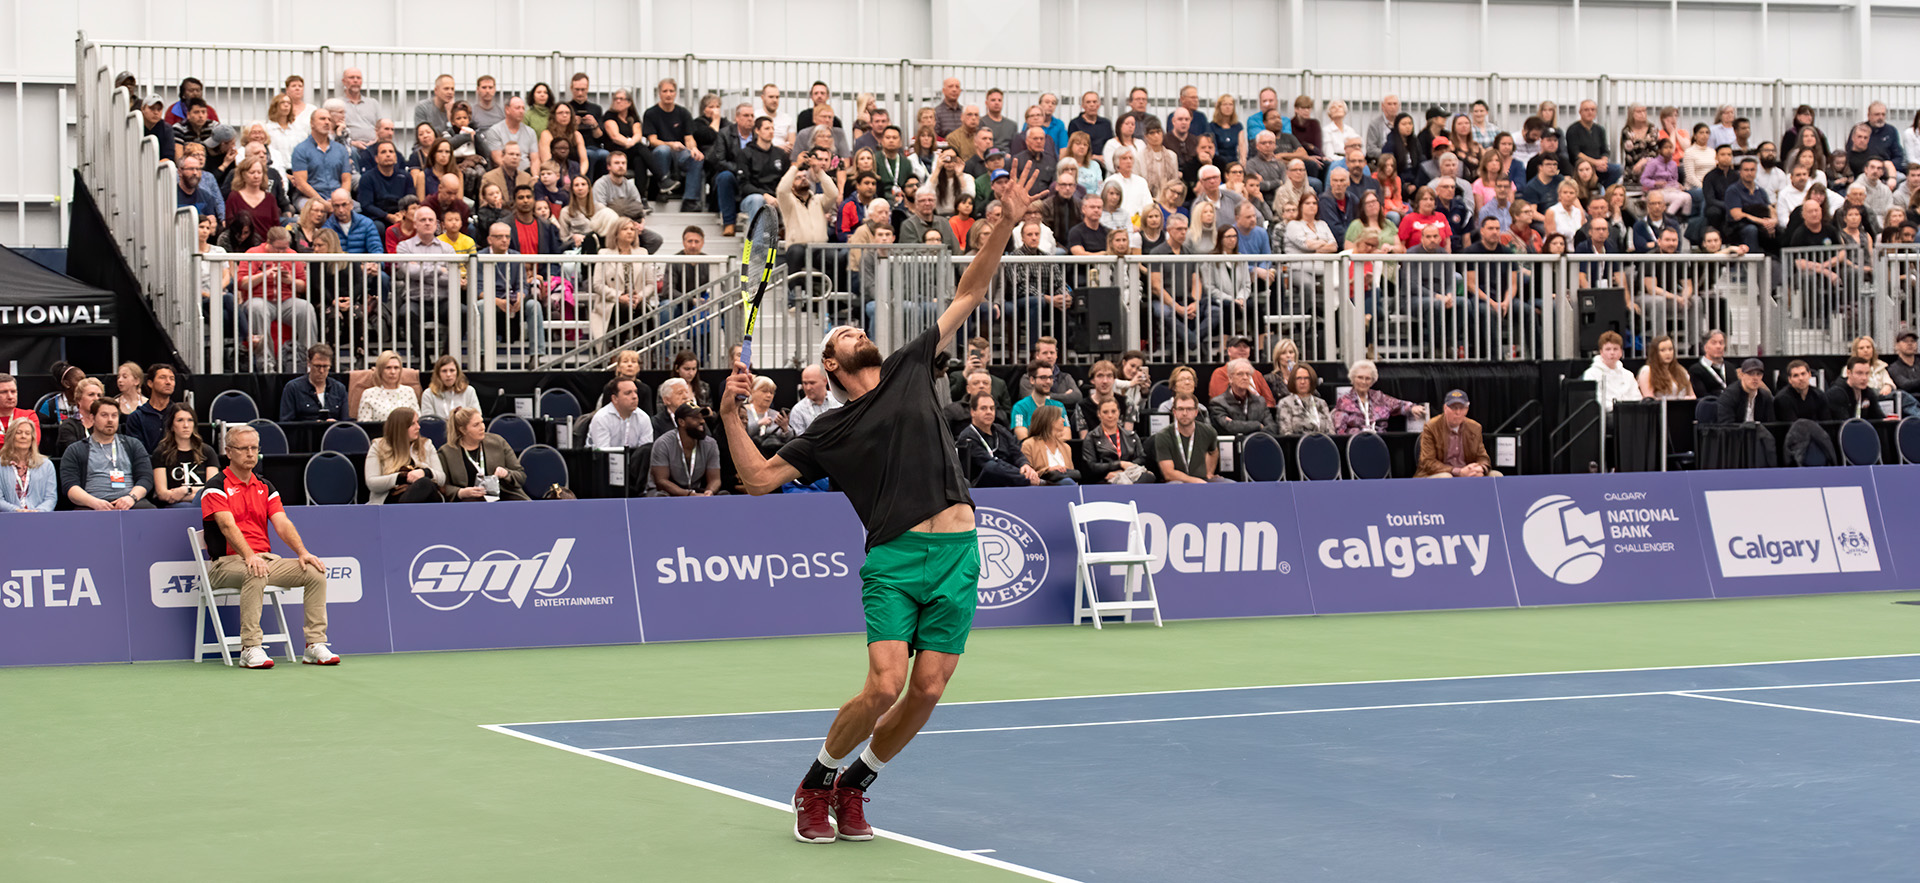 Athlete serving a tennis ball in front of a crowd of onlookers at the Calgary National Bank Challenger